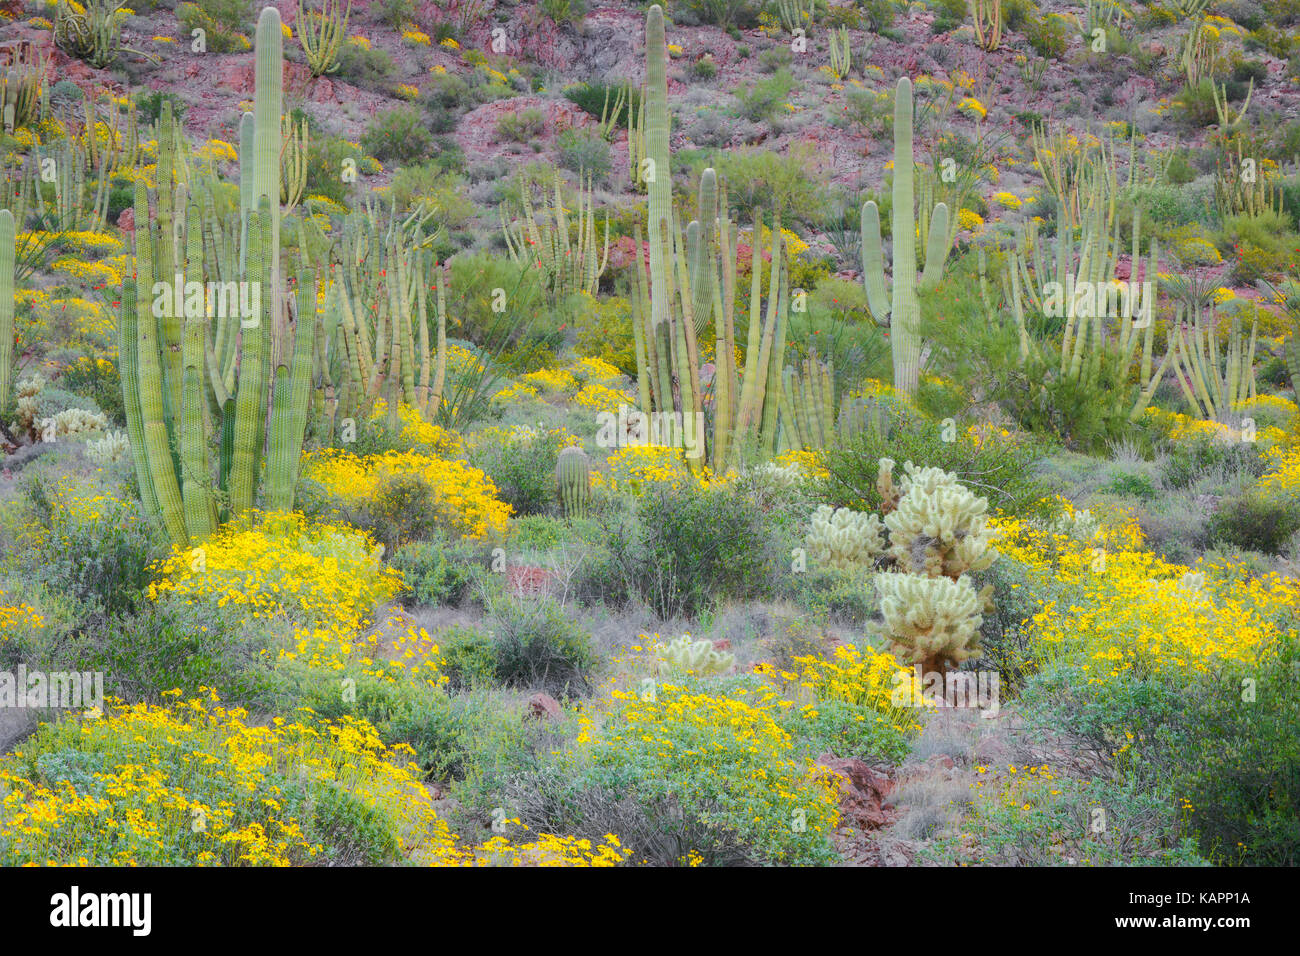 Spring bloom of brittle bush among the varieties of cacti in the Sonoran Desert and Arizona’s Organ Pipe Cactus National Monument. Stock Photo